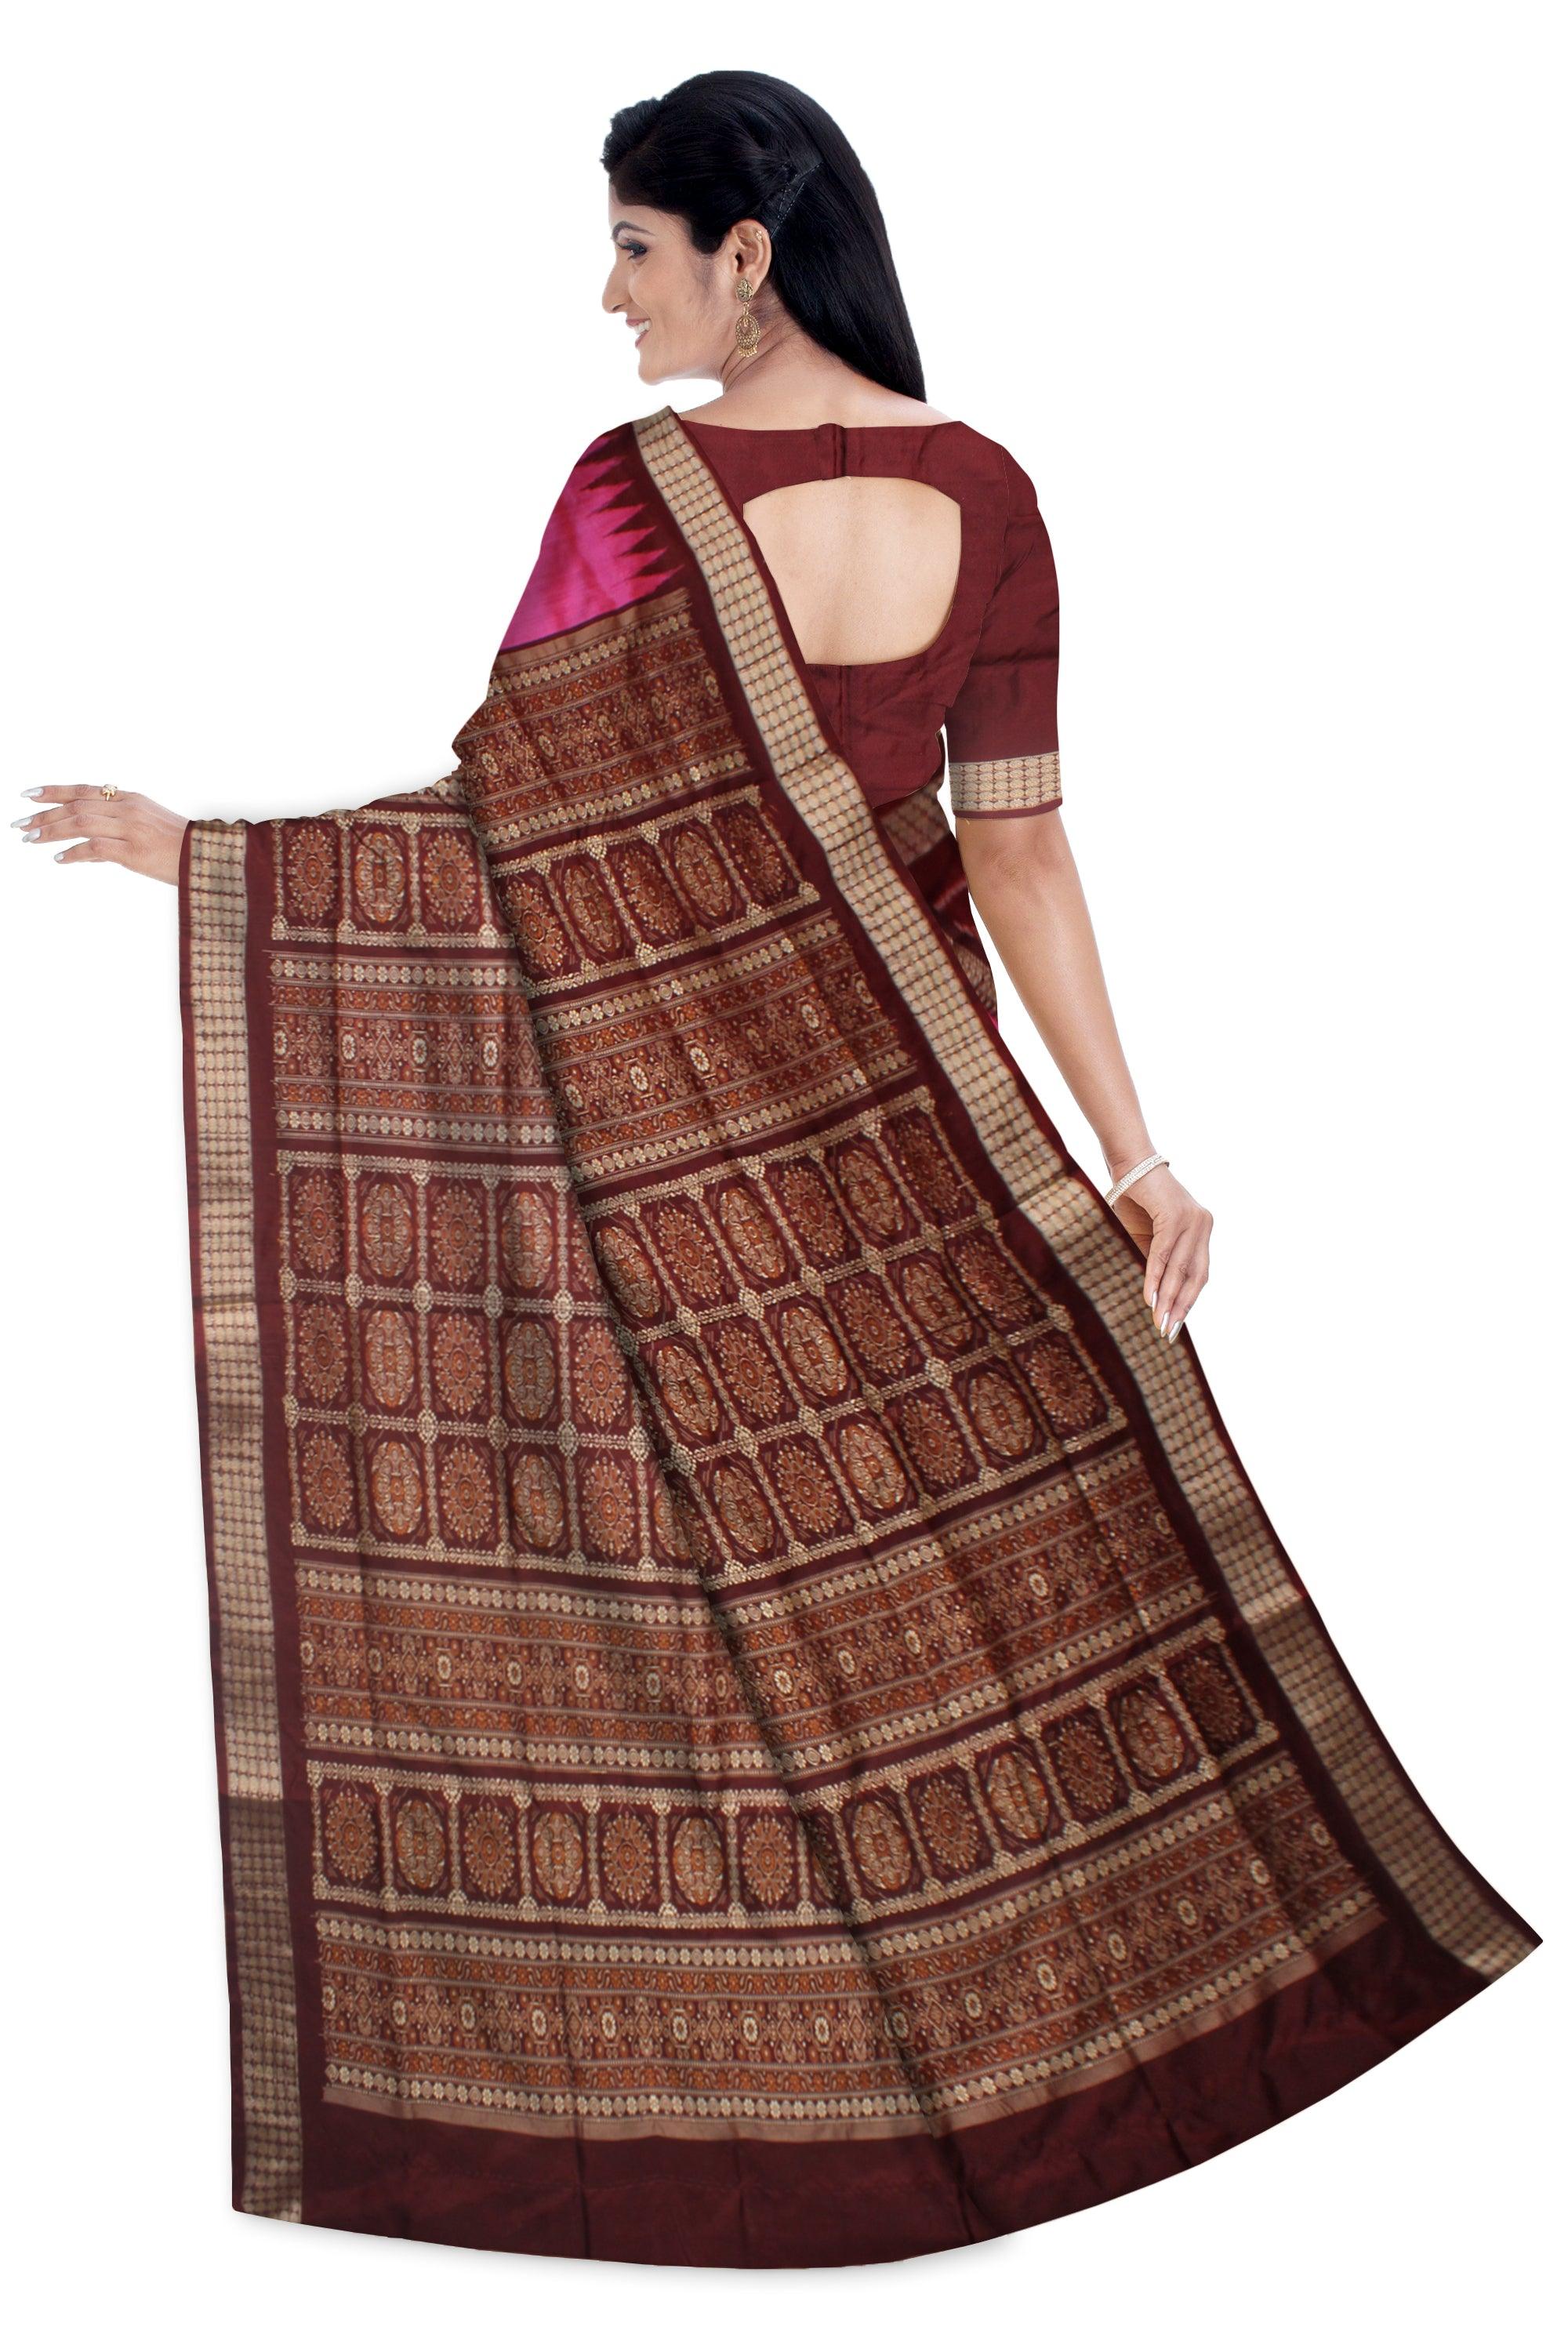 NEW PINK AND MAROON  COLOR PATLI  PADMA PATA SAREE, AVAILABLE  WITH BLOUSE PIECE. - Koshali Arts & Crafts Enterprise